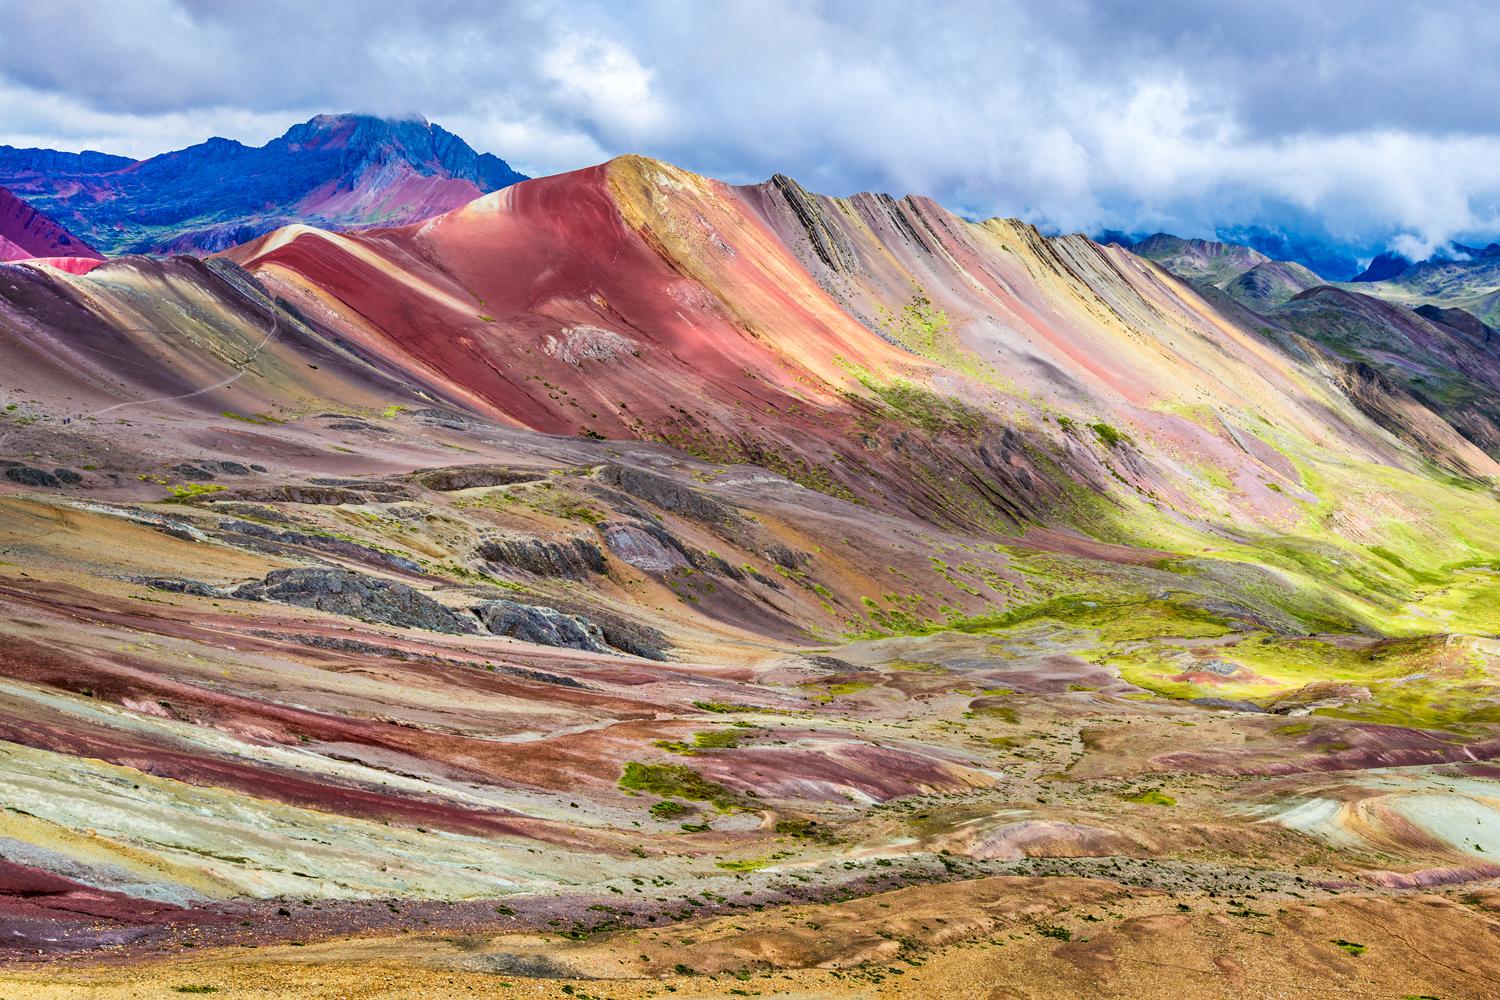 Rainbow Mountain in the afternoon